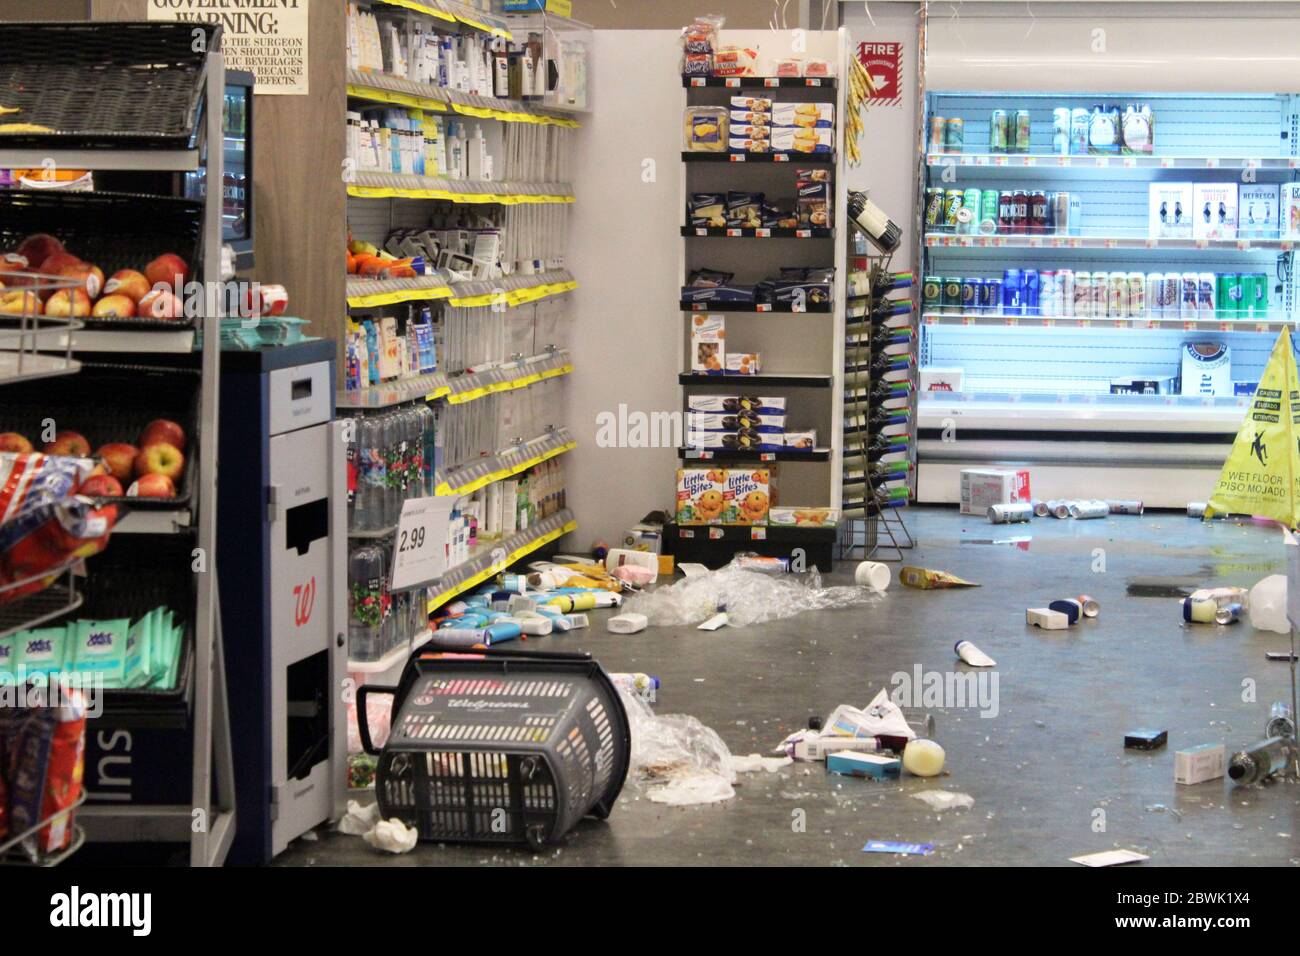 May 31, 2020, New York, New York, USA: Day of peaceful NYC marches gives way to chaos after dark after 4th day of protests over deathÃ‚Â ofÃ‚Â George Floyd.Ã‚Â Looters stormed Lower Manhattan, destroying multiple stores,Ã‚Â stealing items,Ã‚Â lighting fires,Ã‚Â and clashing with police all night long. This Walgreens store was ransacked by vandals. Officials and police believe it is the result of well-organized groups infiltrating peaceful protests, turning them into a riot.Ã‚Â The NYPD arrested more than 250 people. New York City decided to impose a curfew from 11:00 p.m. to 5:00 a.m. (Credit Stock Photo